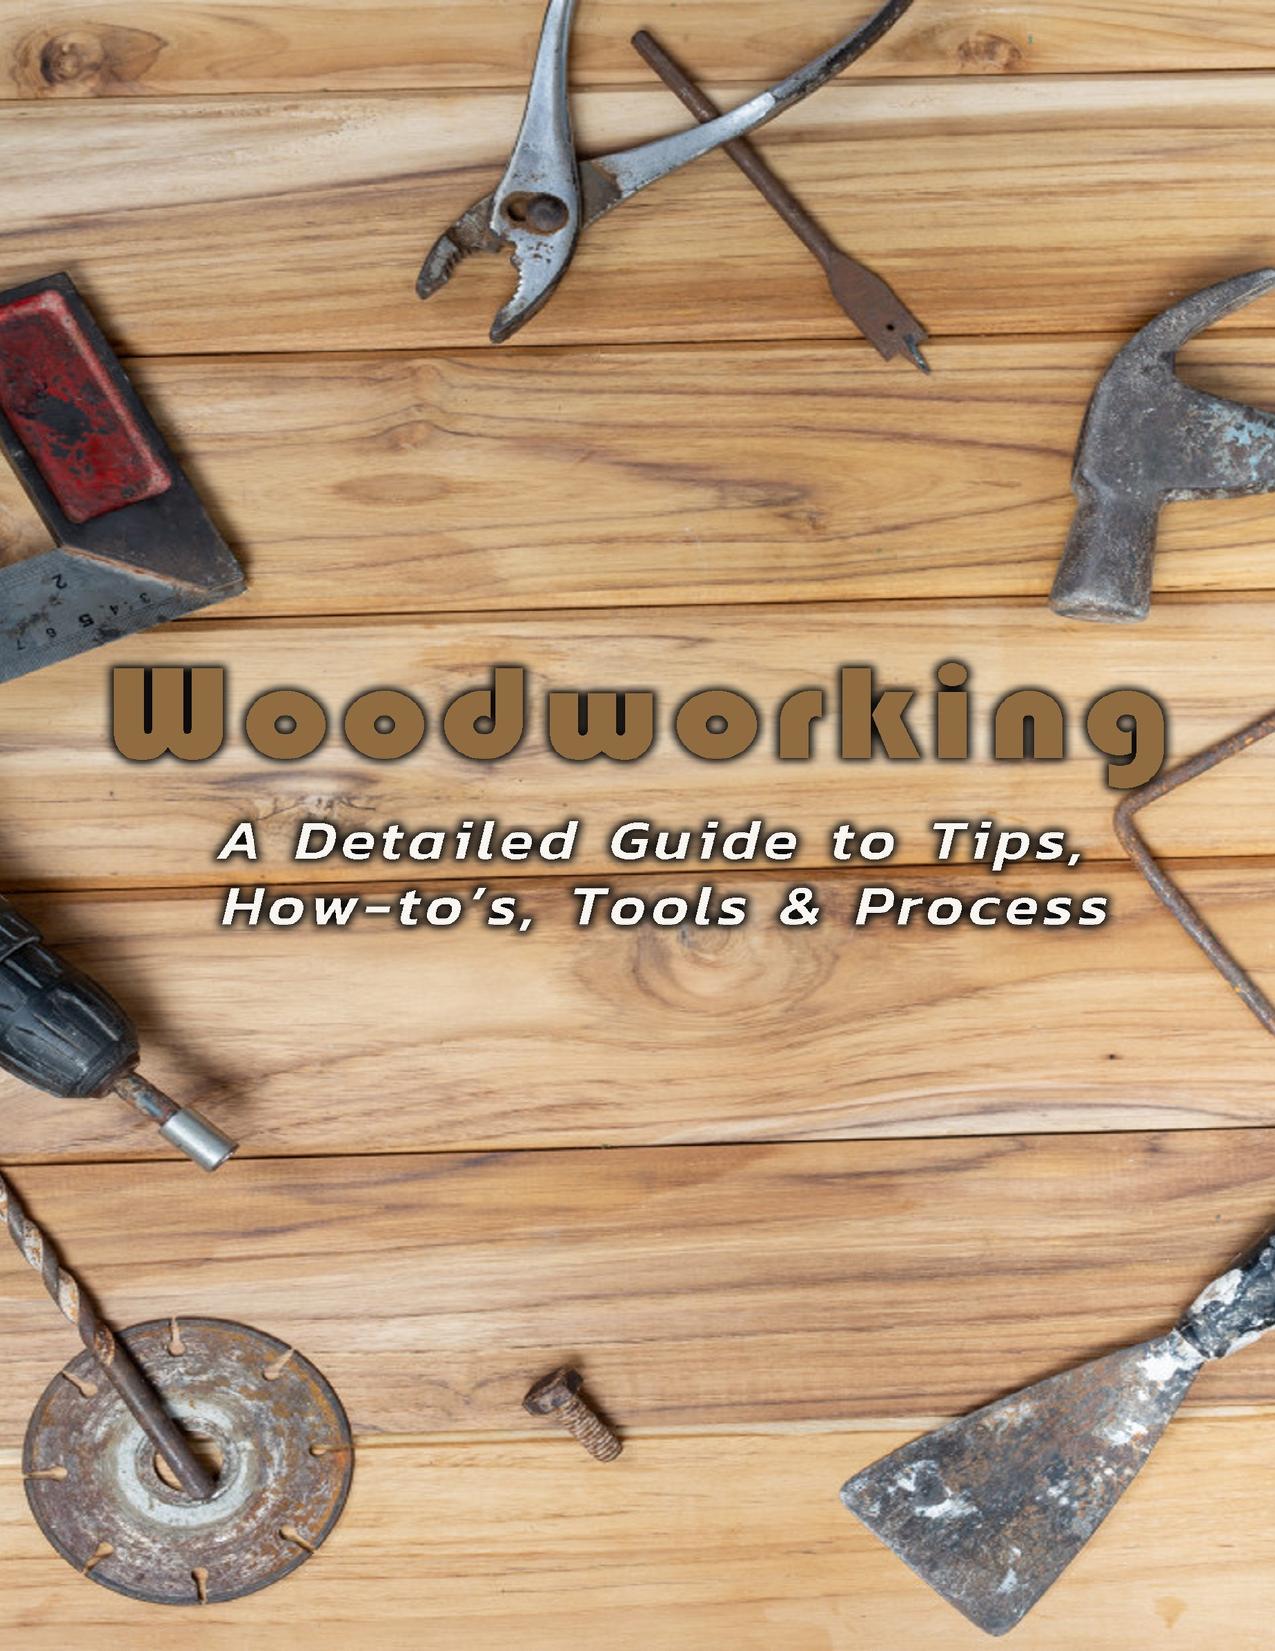 Woodworking: A Detailed Guide to Tips, How-to’s, Tools & Process: Woodworking by Thourson Scott